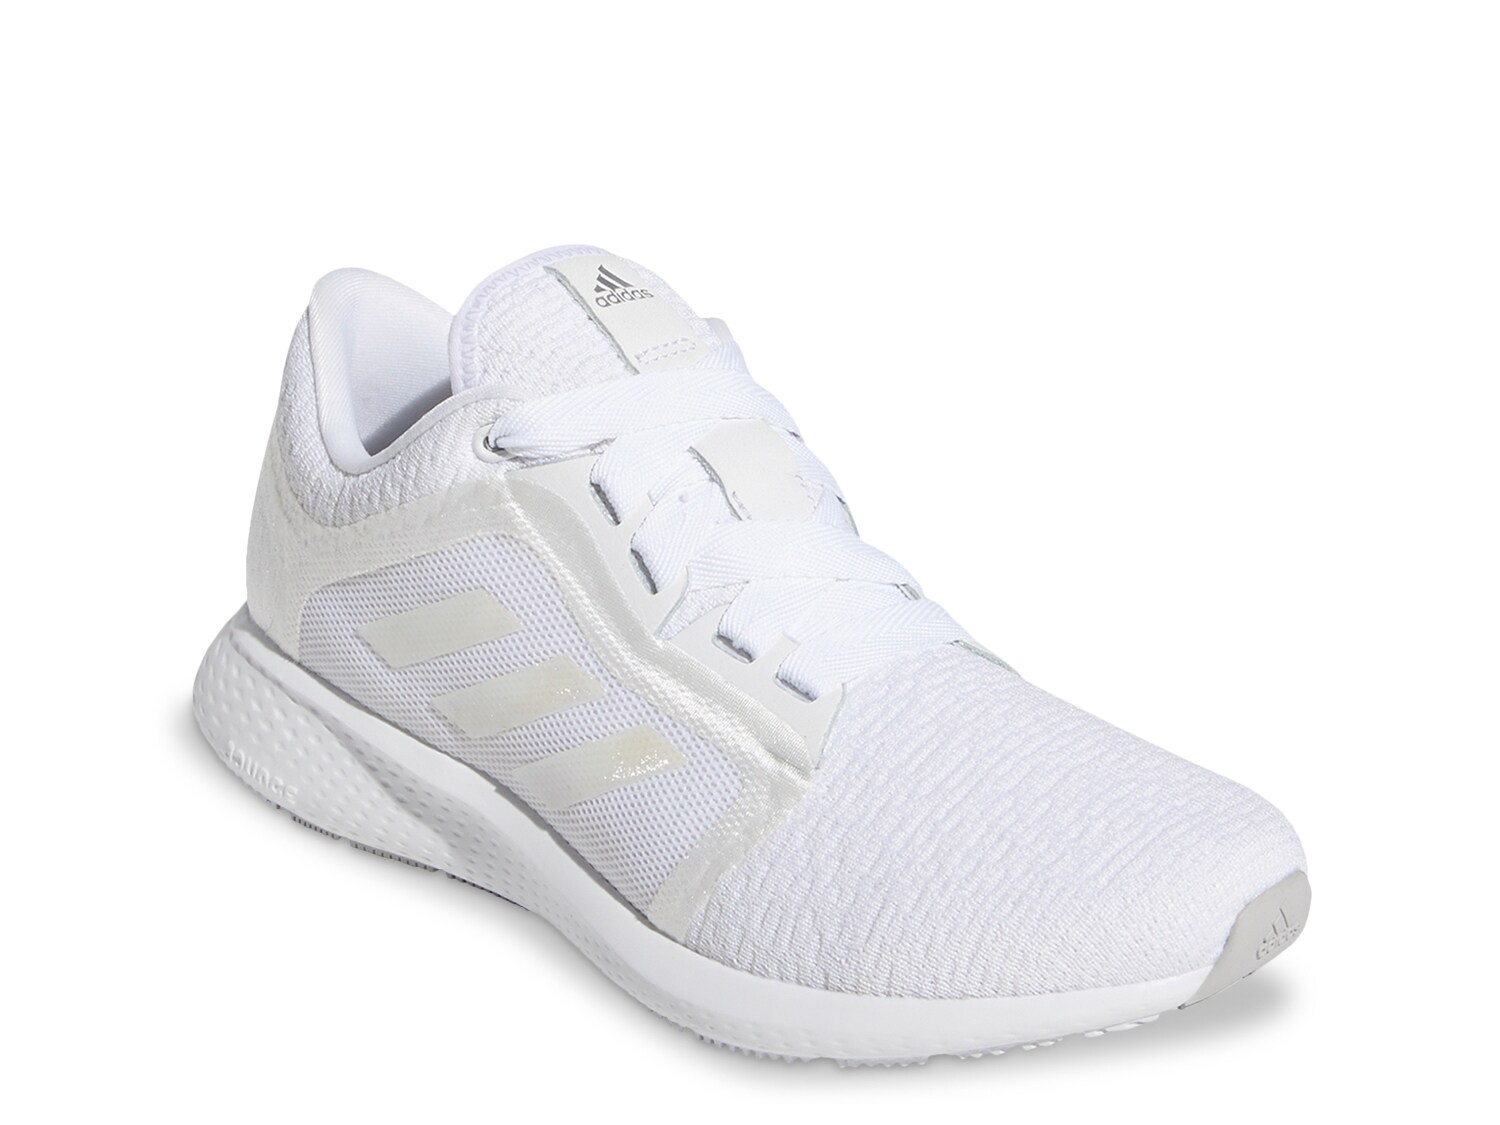 dsw adidas tennis shoes